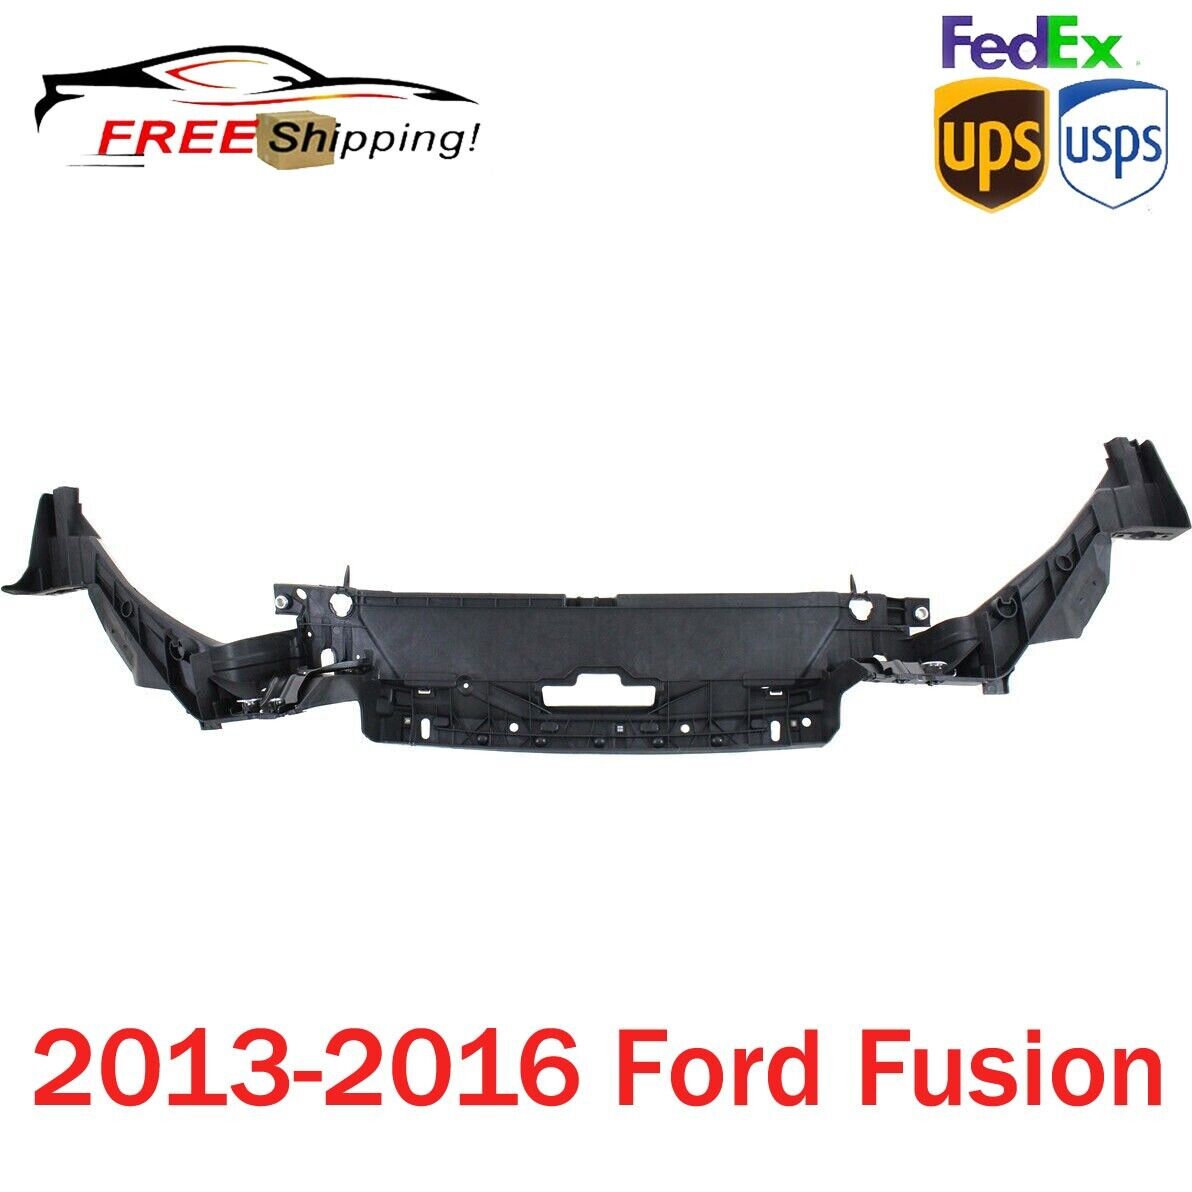 New Header Panel For 2013-2016 Ford Fusion Front Fiberglass Black FO1220244